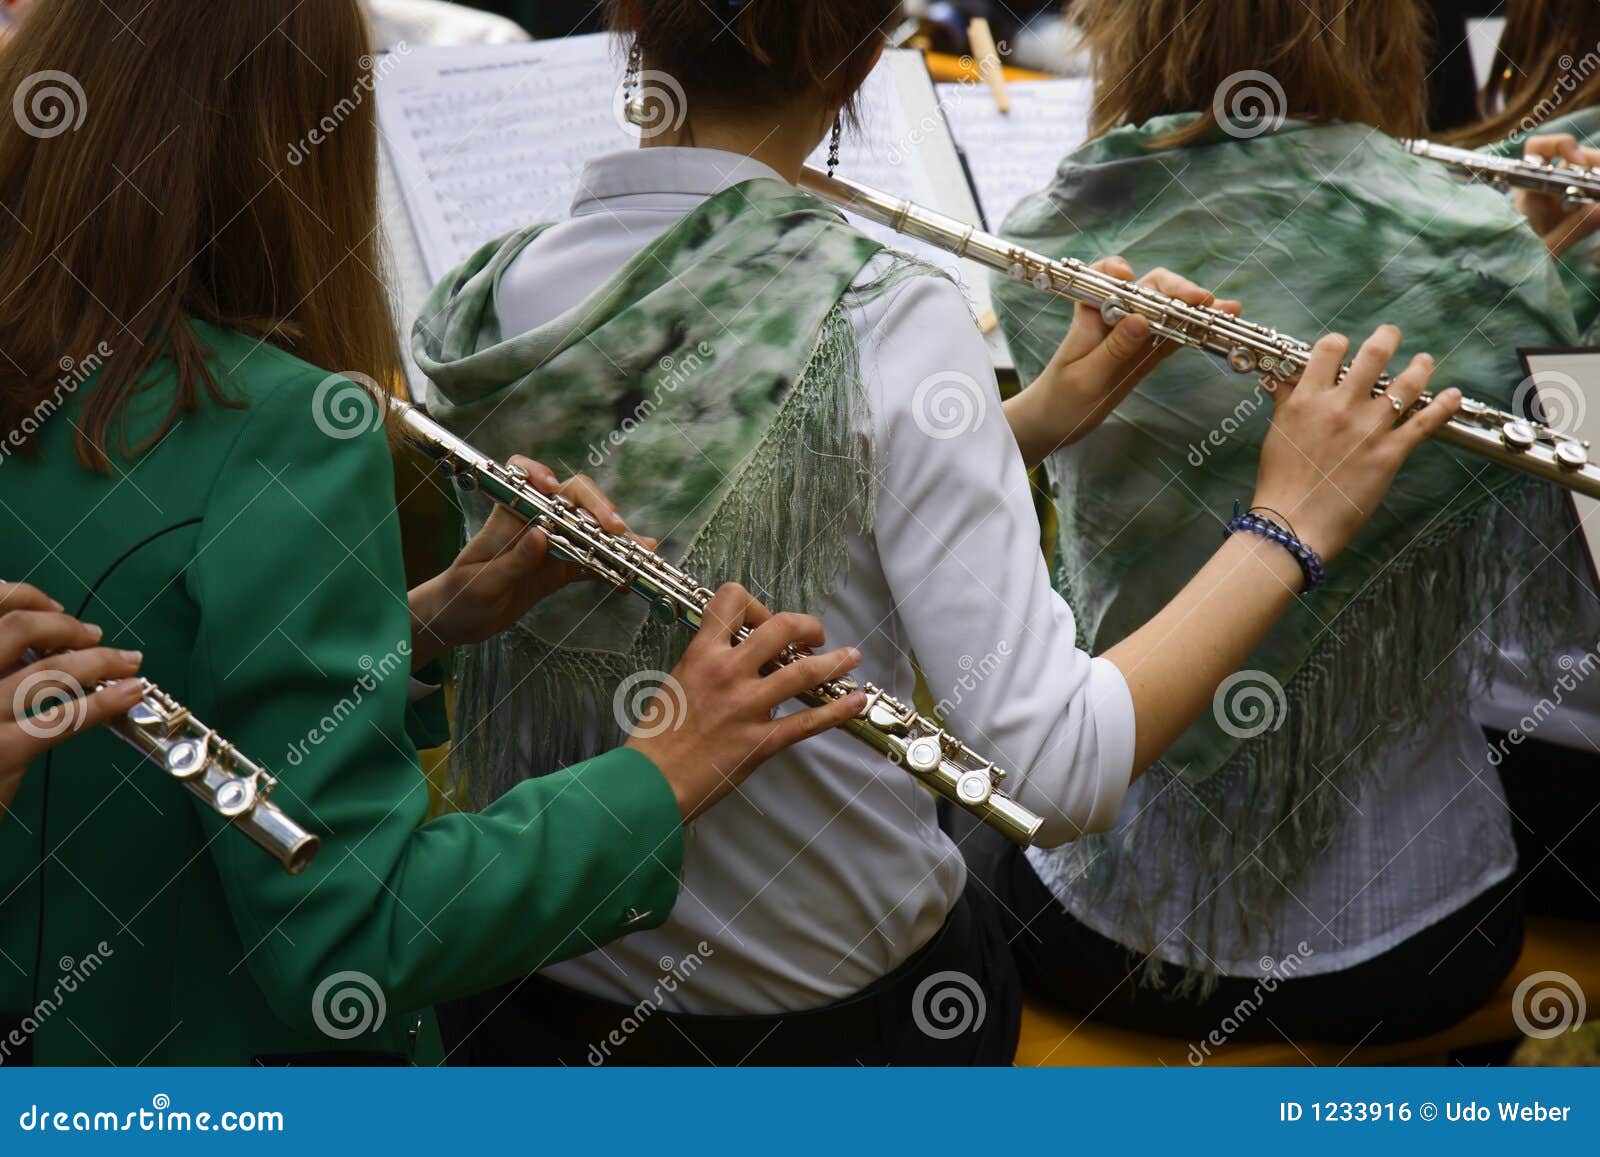 Playing The Flute Royalty Free Stock Image - Image: 1233916